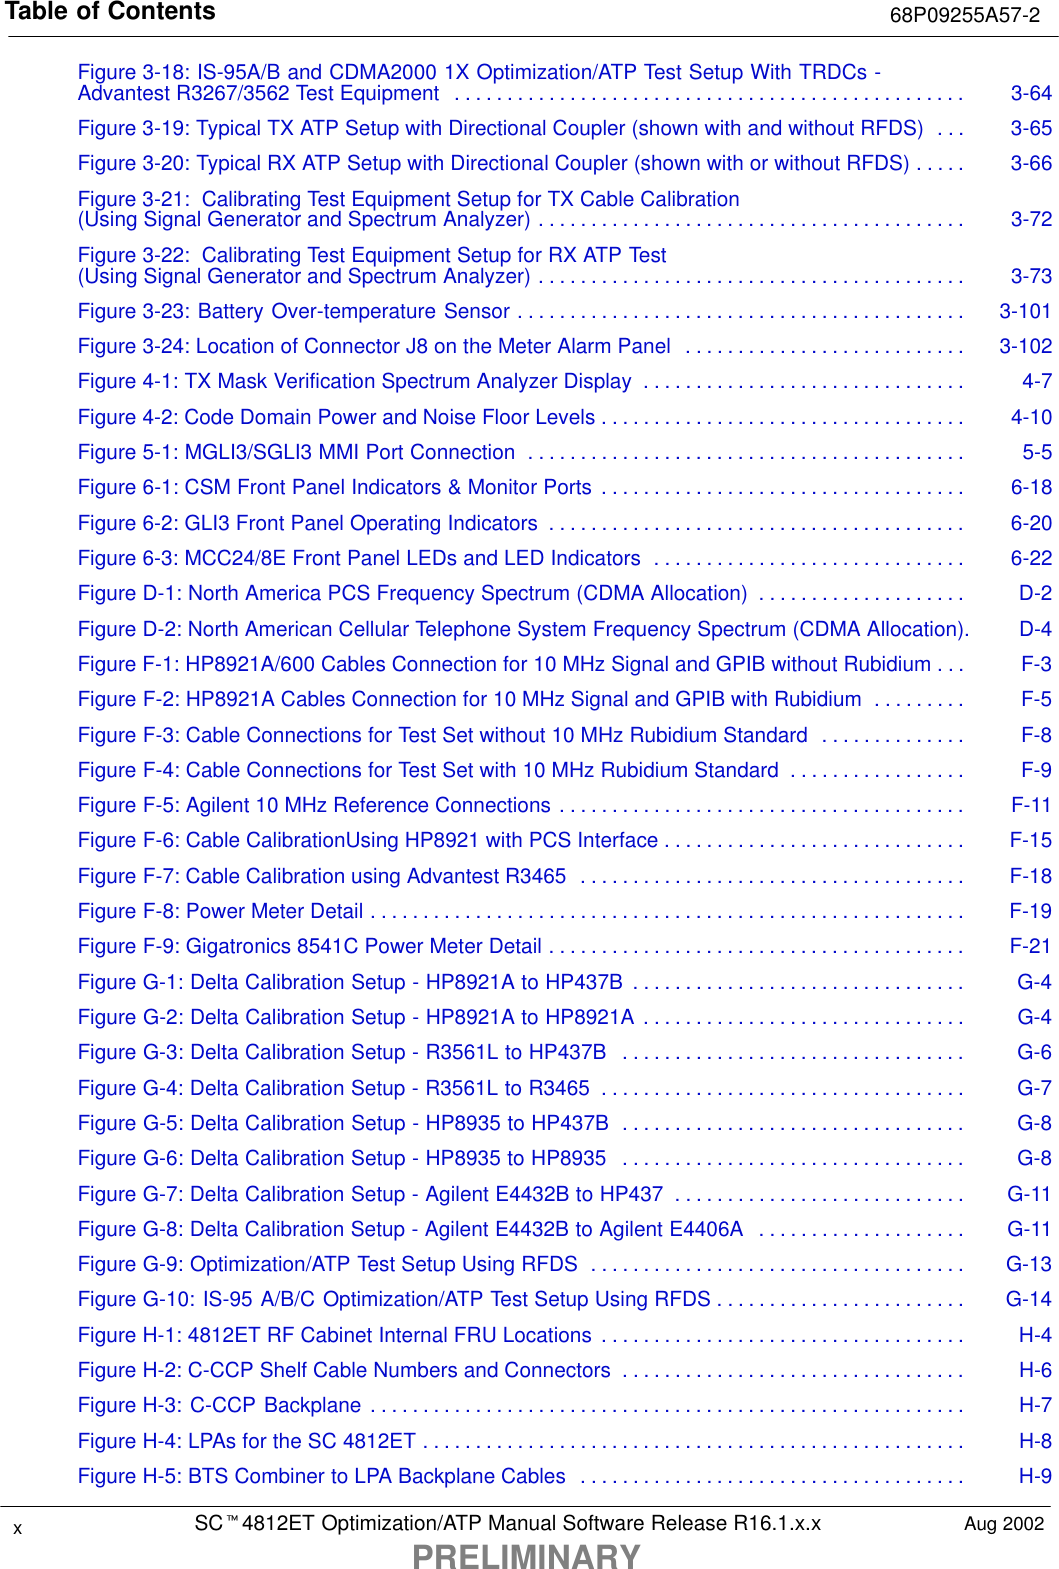 Table of Contents 68P09255A57-2SCt4812ET Optimization/ATP Manual Software Release R16.1.x.xPRELIMINARYxAug 2002Figure 3-18: IS-95A/B and CDMA2000 1X Optimization/ATP Test Setup With TRDCs - Advantest R3267/3562 Test Equipment 3-64. . . . . . . . . . . . . . . . . . . . . . . . . . . . . . . . . . . . . . . . . . . . . . . . . Figure 3-19: Typical TX ATP Setup with Directional Coupler (shown with and without RFDS) 3-65. . . Figure 3-20: Typical RX ATP Setup with Directional Coupler (shown with or without RFDS) 3-66. . . . . Figure 3-21:  Calibrating Test Equipment Setup for TX Cable Calibration(Using Signal Generator and Spectrum Analyzer) 3-72. . . . . . . . . . . . . . . . . . . . . . . . . . . . . . . . . . . . . . . . . Figure 3-22:  Calibrating Test Equipment Setup for RX ATP Test(Using Signal Generator and Spectrum Analyzer) 3-73. . . . . . . . . . . . . . . . . . . . . . . . . . . . . . . . . . . . . . . . . Figure 3-23: Battery Over-temperature Sensor 3-101. . . . . . . . . . . . . . . . . . . . . . . . . . . . . . . . . . . . . . . . . . . Figure 3-24: Location of Connector J8 on the Meter Alarm Panel 3-102. . . . . . . . . . . . . . . . . . . . . . . . . . . Figure 4-1: TX Mask Verification Spectrum Analyzer Display 4-7. . . . . . . . . . . . . . . . . . . . . . . . . . . . . . . Figure 4-2: Code Domain Power and Noise Floor Levels 4-10. . . . . . . . . . . . . . . . . . . . . . . . . . . . . . . . . . . Figure 5-1: MGLI3/SGLI3 MMI Port Connection 5-5. . . . . . . . . . . . . . . . . . . . . . . . . . . . . . . . . . . . . . . . . . Figure 6-1: CSM Front Panel Indicators &amp; Monitor Ports 6-18. . . . . . . . . . . . . . . . . . . . . . . . . . . . . . . . . . . Figure 6-2: GLI3 Front Panel Operating Indicators 6-20. . . . . . . . . . . . . . . . . . . . . . . . . . . . . . . . . . . . . . . . Figure 6-3: MCC24/8E Front Panel LEDs and LED Indicators 6-22. . . . . . . . . . . . . . . . . . . . . . . . . . . . . . Figure D-1: North America PCS Frequency Spectrum (CDMA Allocation) D-2. . . . . . . . . . . . . . . . . . . . Figure D-2: North American Cellular Telephone System Frequency Spectrum (CDMA Allocation). D-4Figure F-1: HP8921A/600 Cables Connection for 10 MHz Signal and GPIB without Rubidium F-3. . . Figure F-2: HP8921A Cables Connection for 10 MHz Signal and GPIB with Rubidium F-5. . . . . . . . . Figure F-3: Cable Connections for Test Set without 10 MHz Rubidium Standard F-8. . . . . . . . . . . . . . Figure F-4: Cable Connections for Test Set with 10 MHz Rubidium Standard F-9. . . . . . . . . . . . . . . . . Figure F-5: Agilent 10 MHz Reference Connections F-11. . . . . . . . . . . . . . . . . . . . . . . . . . . . . . . . . . . . . . . Figure F-6: Cable CalibrationUsing HP8921 with PCS Interface F-15. . . . . . . . . . . . . . . . . . . . . . . . . . . . . Figure F-7: Cable Calibration using Advantest R3465 F-18. . . . . . . . . . . . . . . . . . . . . . . . . . . . . . . . . . . . . Figure F-8: Power Meter Detail F-19. . . . . . . . . . . . . . . . . . . . . . . . . . . . . . . . . . . . . . . . . . . . . . . . . . . . . . . . . Figure F-9: Gigatronics 8541C Power Meter Detail F-21. . . . . . . . . . . . . . . . . . . . . . . . . . . . . . . . . . . . . . . . Figure G-1: Delta Calibration Setup - HP8921A to HP437B G-4. . . . . . . . . . . . . . . . . . . . . . . . . . . . . . . . Figure G-2: Delta Calibration Setup - HP8921A to HP8921A G-4. . . . . . . . . . . . . . . . . . . . . . . . . . . . . . . Figure G-3: Delta Calibration Setup - R3561L to HP437B G-6. . . . . . . . . . . . . . . . . . . . . . . . . . . . . . . . . Figure G-4: Delta Calibration Setup - R3561L to R3465 G-7. . . . . . . . . . . . . . . . . . . . . . . . . . . . . . . . . . . Figure G-5: Delta Calibration Setup - HP8935 to HP437B G-8. . . . . . . . . . . . . . . . . . . . . . . . . . . . . . . . . Figure G-6: Delta Calibration Setup - HP8935 to HP8935 G-8. . . . . . . . . . . . . . . . . . . . . . . . . . . . . . . . . Figure G-7: Delta Calibration Setup - Agilent E4432B to HP437 G-11. . . . . . . . . . . . . . . . . . . . . . . . . . . . Figure G-8: Delta Calibration Setup - Agilent E4432B to Agilent E4406A G-11. . . . . . . . . . . . . . . . . . . . Figure G-9: Optimization/ATP Test Setup Using RFDS G-13. . . . . . . . . . . . . . . . . . . . . . . . . . . . . . . . . . . . Figure G-10: IS-95 A/B/C Optimization/ATP Test Setup Using RFDS G-14. . . . . . . . . . . . . . . . . . . . . . . . Figure H-1: 4812ET RF Cabinet Internal FRU Locations H-4. . . . . . . . . . . . . . . . . . . . . . . . . . . . . . . . . . . Figure H-2: C-CCP Shelf Cable Numbers and Connectors H-6. . . . . . . . . . . . . . . . . . . . . . . . . . . . . . . . . Figure H-3: C-CCP Backplane H-7. . . . . . . . . . . . . . . . . . . . . . . . . . . . . . . . . . . . . . . . . . . . . . . . . . . . . . . . . Figure H-4: LPAs for the SC 4812ET H-8. . . . . . . . . . . . . . . . . . . . . . . . . . . . . . . . . . . . . . . . . . . . . . . . . . . . Figure H-5: BTS Combiner to LPA Backplane Cables H-9. . . . . . . . . . . . . . . . . . . . . . . . . . . . . . . . . . . . . 